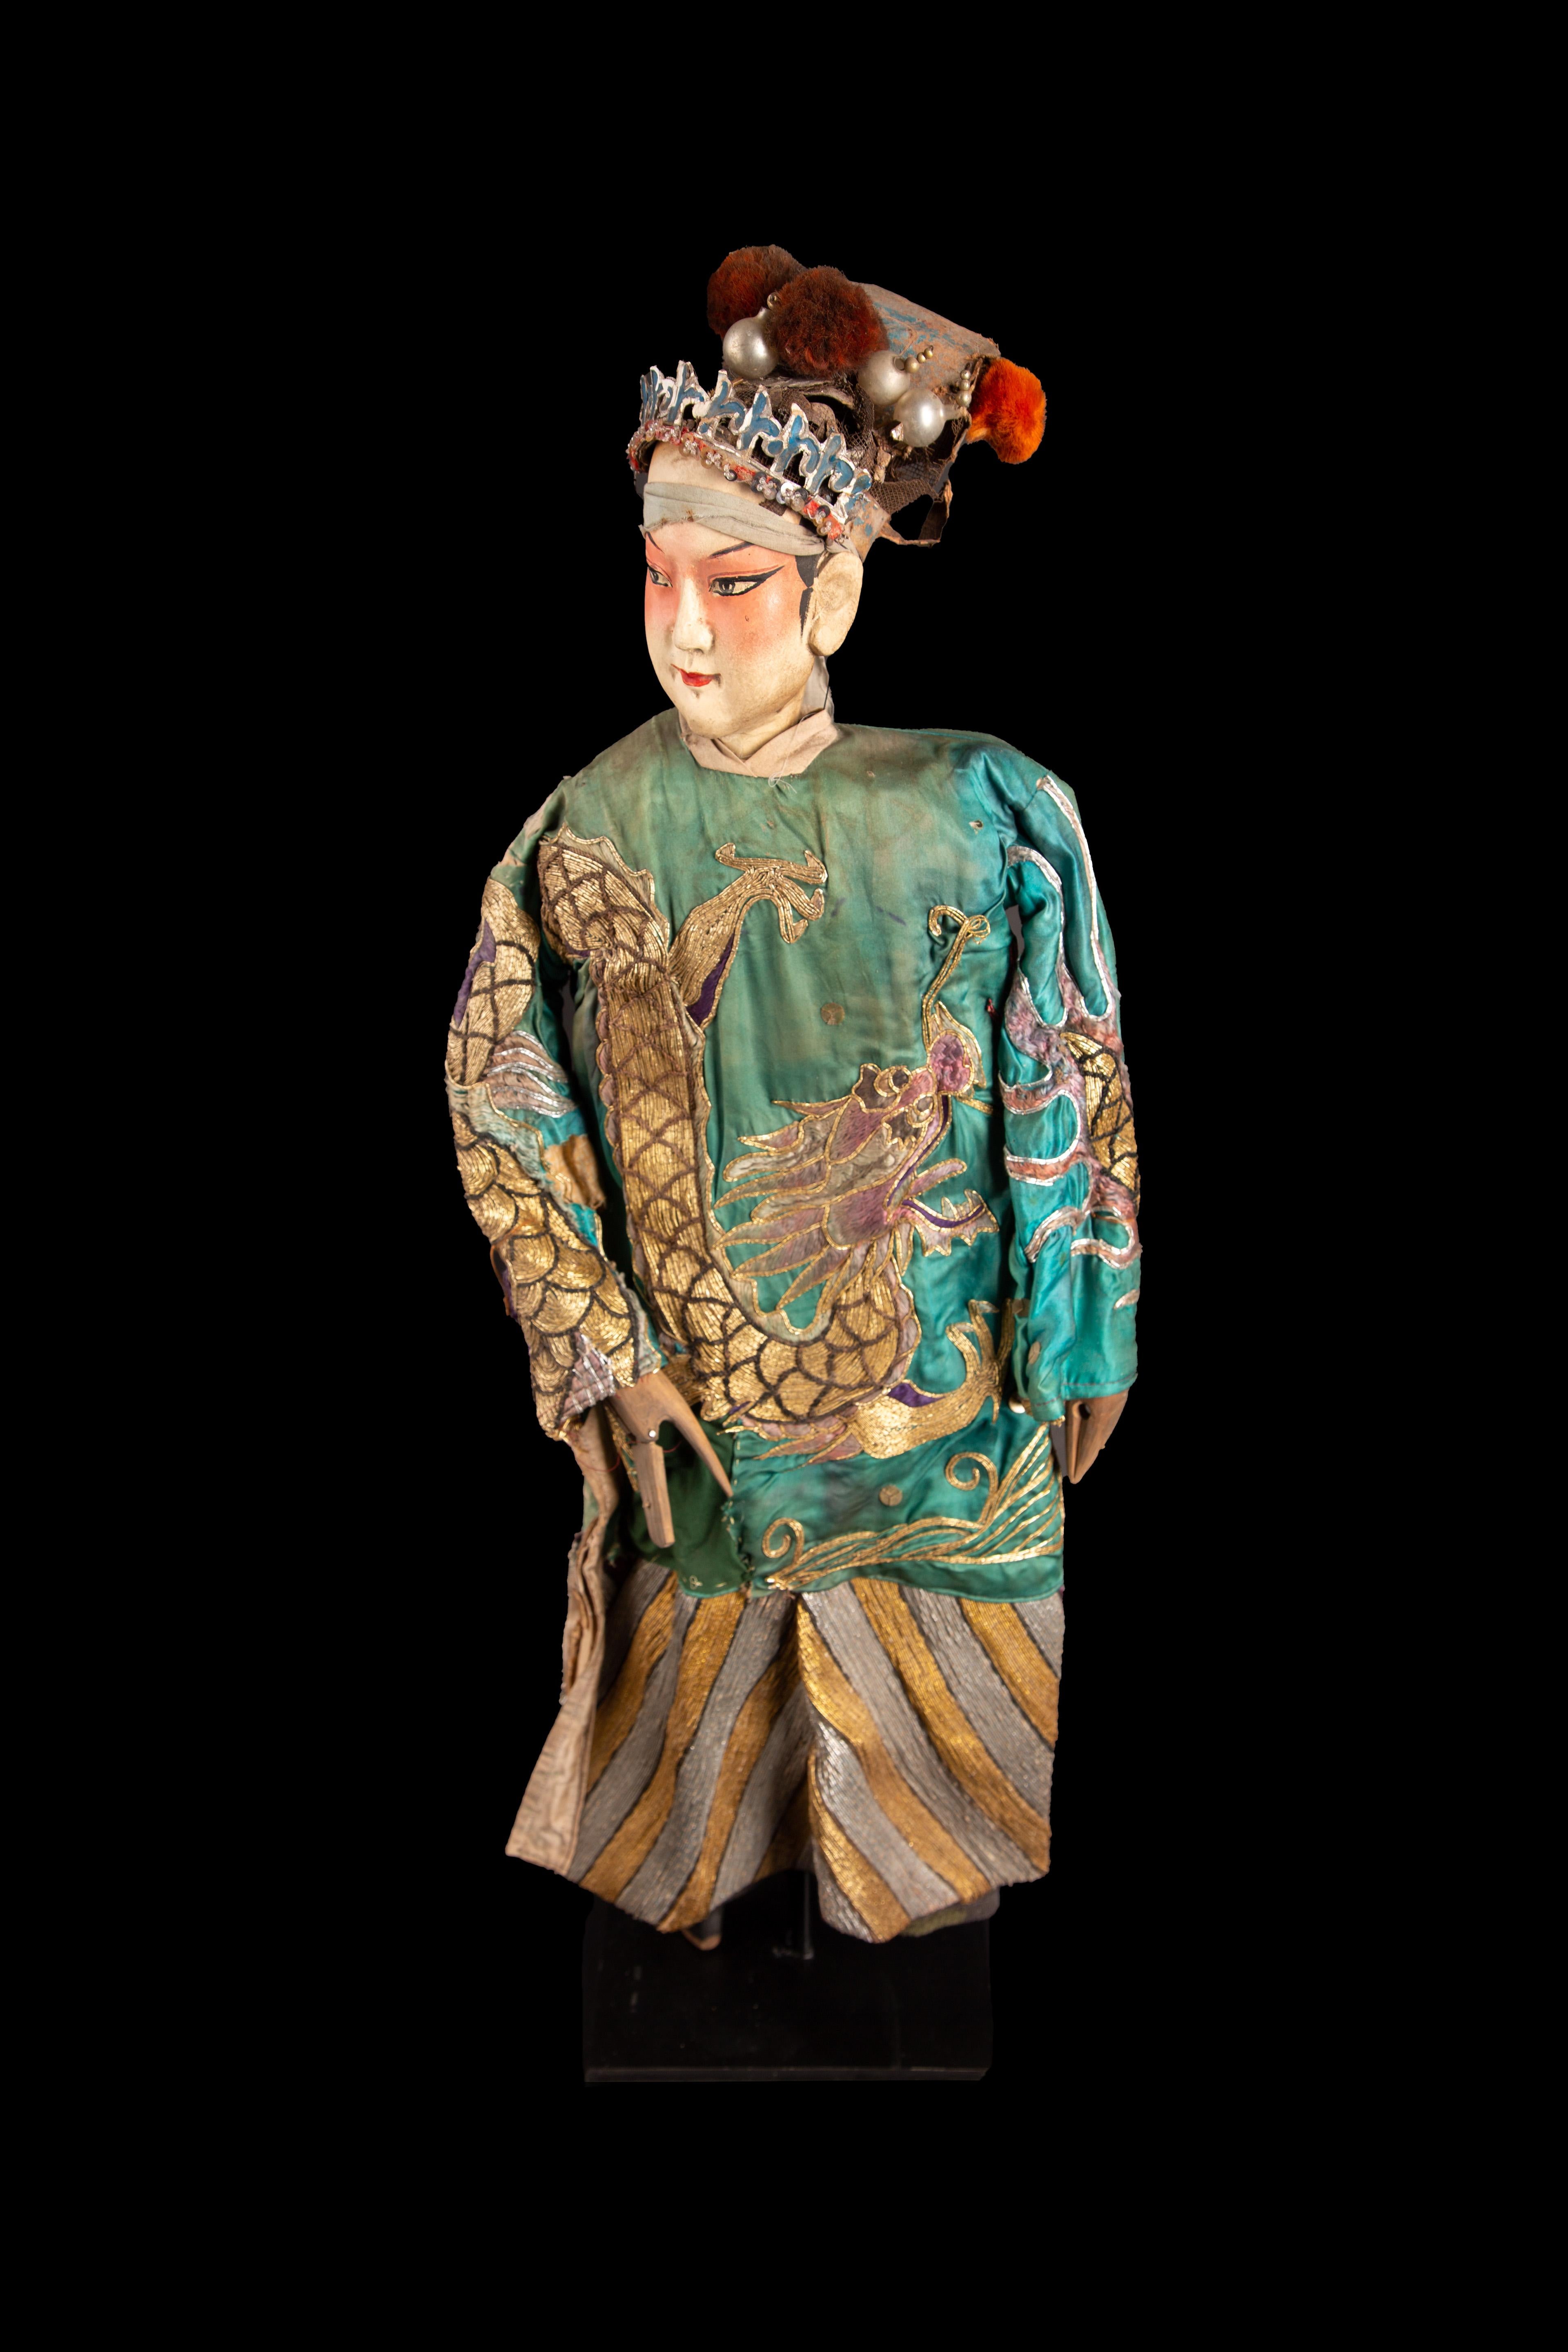 Chinese opera marionette male doll, circa 1920s. The head of this puppet is carved in a soft wood; the feet and hands are also made of wood. The hands can form a closed fist or an open palm by the joint at the level of the fingers. The headdress of